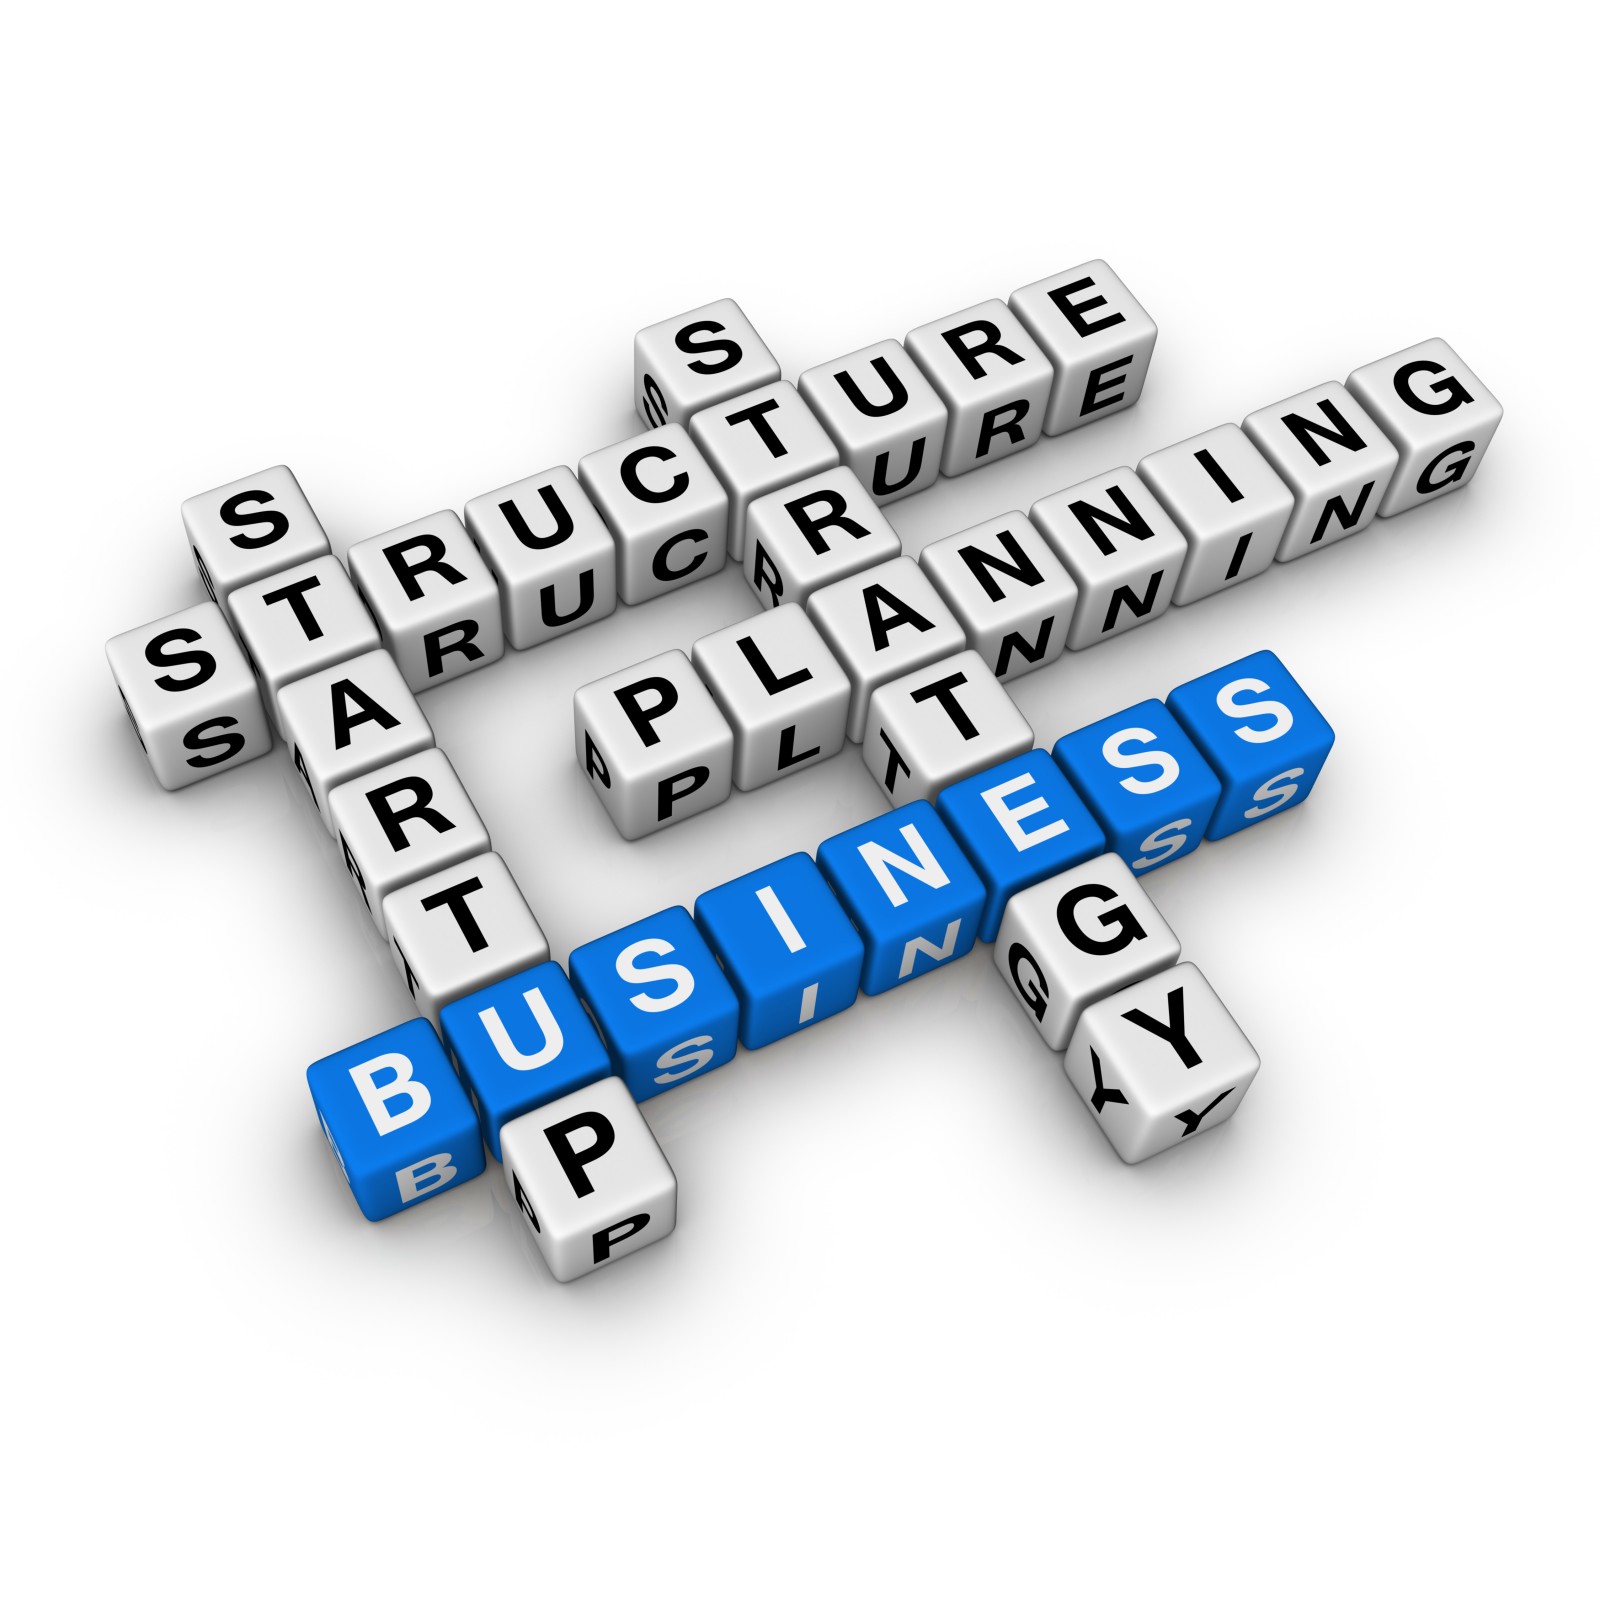 startup business (blue-white cubes crossword series)